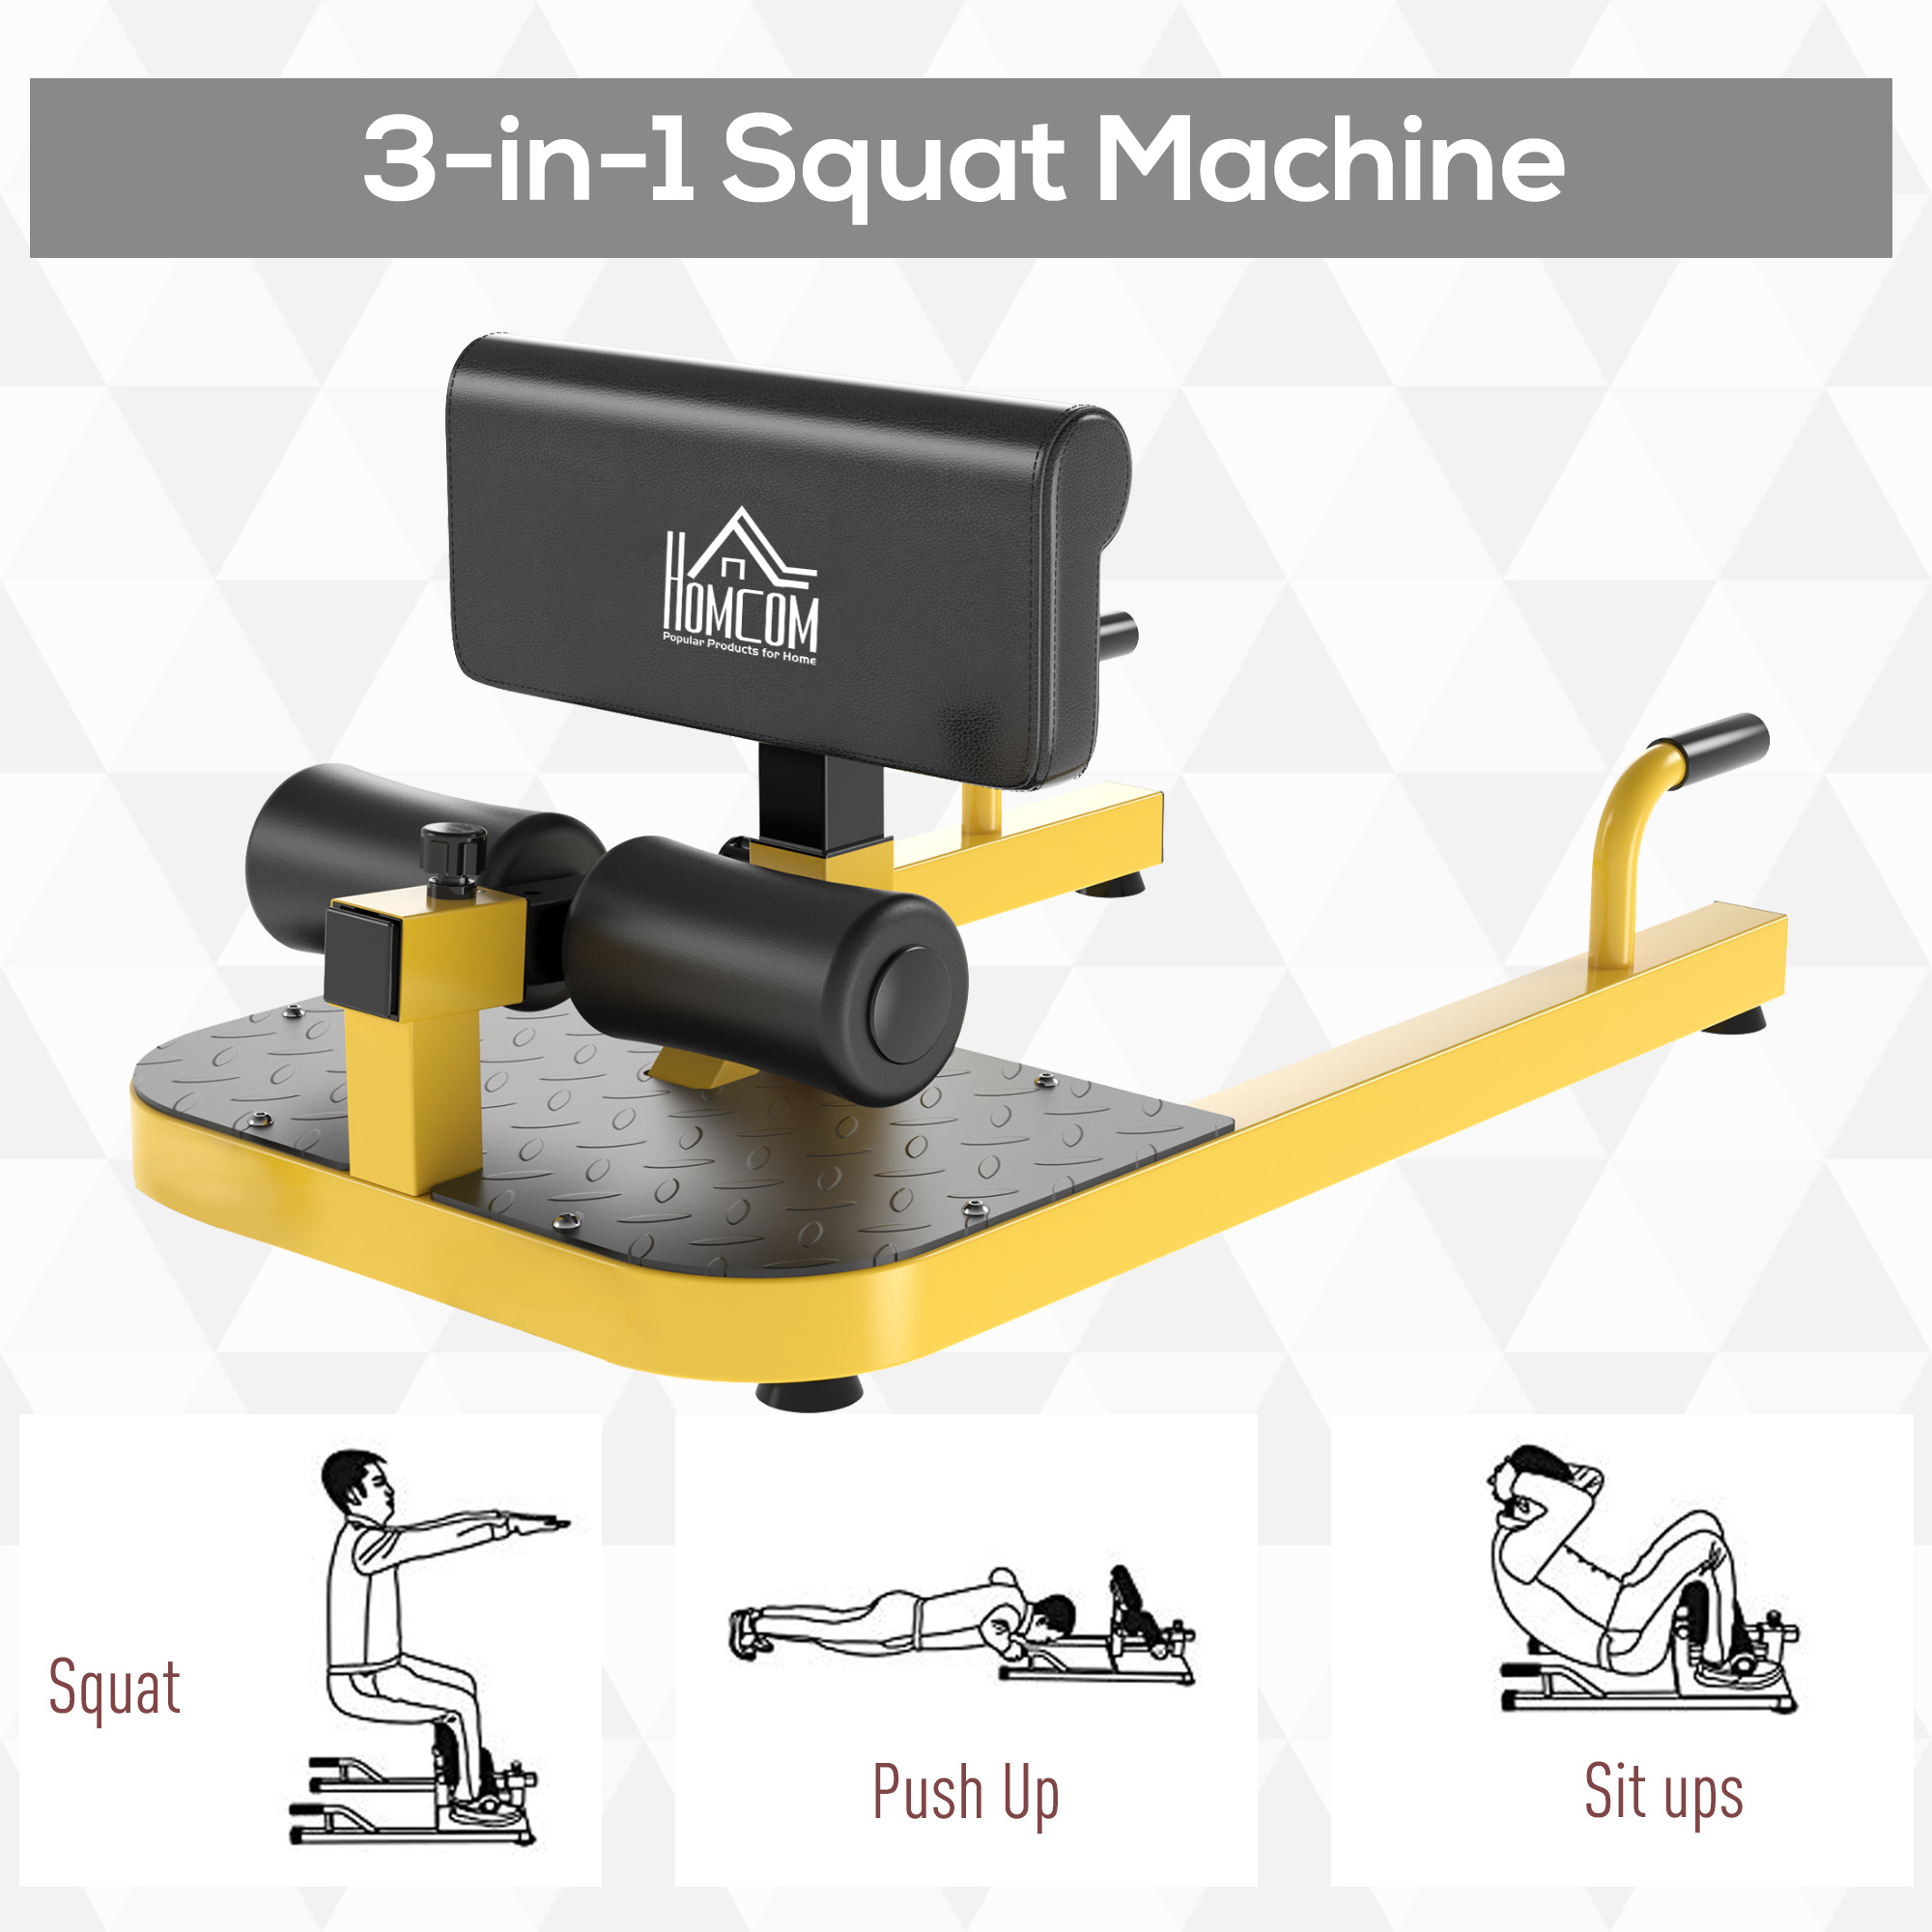 Soozier 3-in-1 Padded Push-up, Sit-up Deep Sissy Squat Machine Home Gym Fitness Equipment, Yellow - image 5 of 9